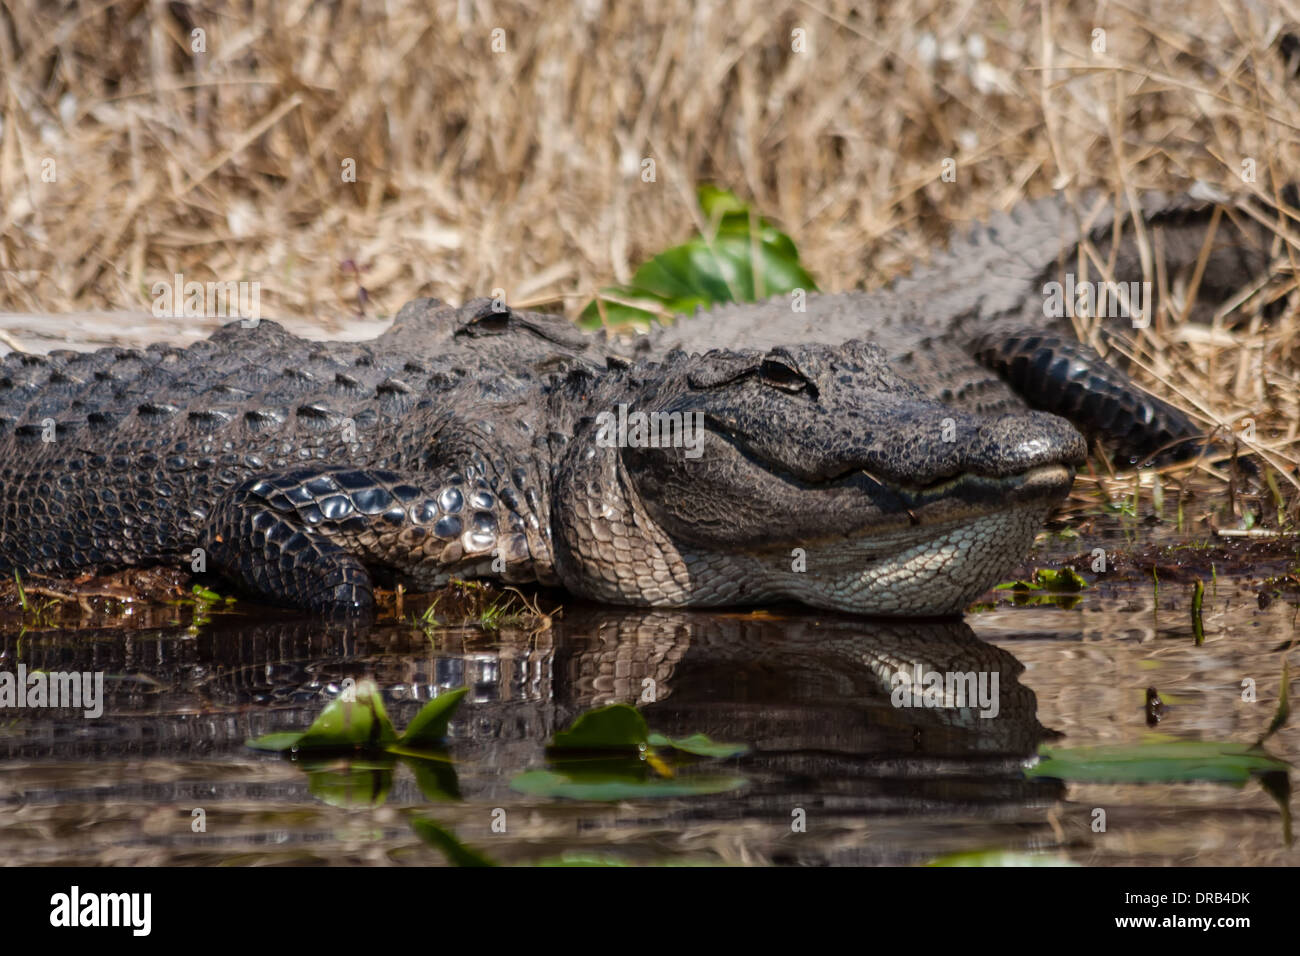 An American alligator (Alligator mississippiensis) warming itself by sitting in the sun in a swamp. Stock Photo